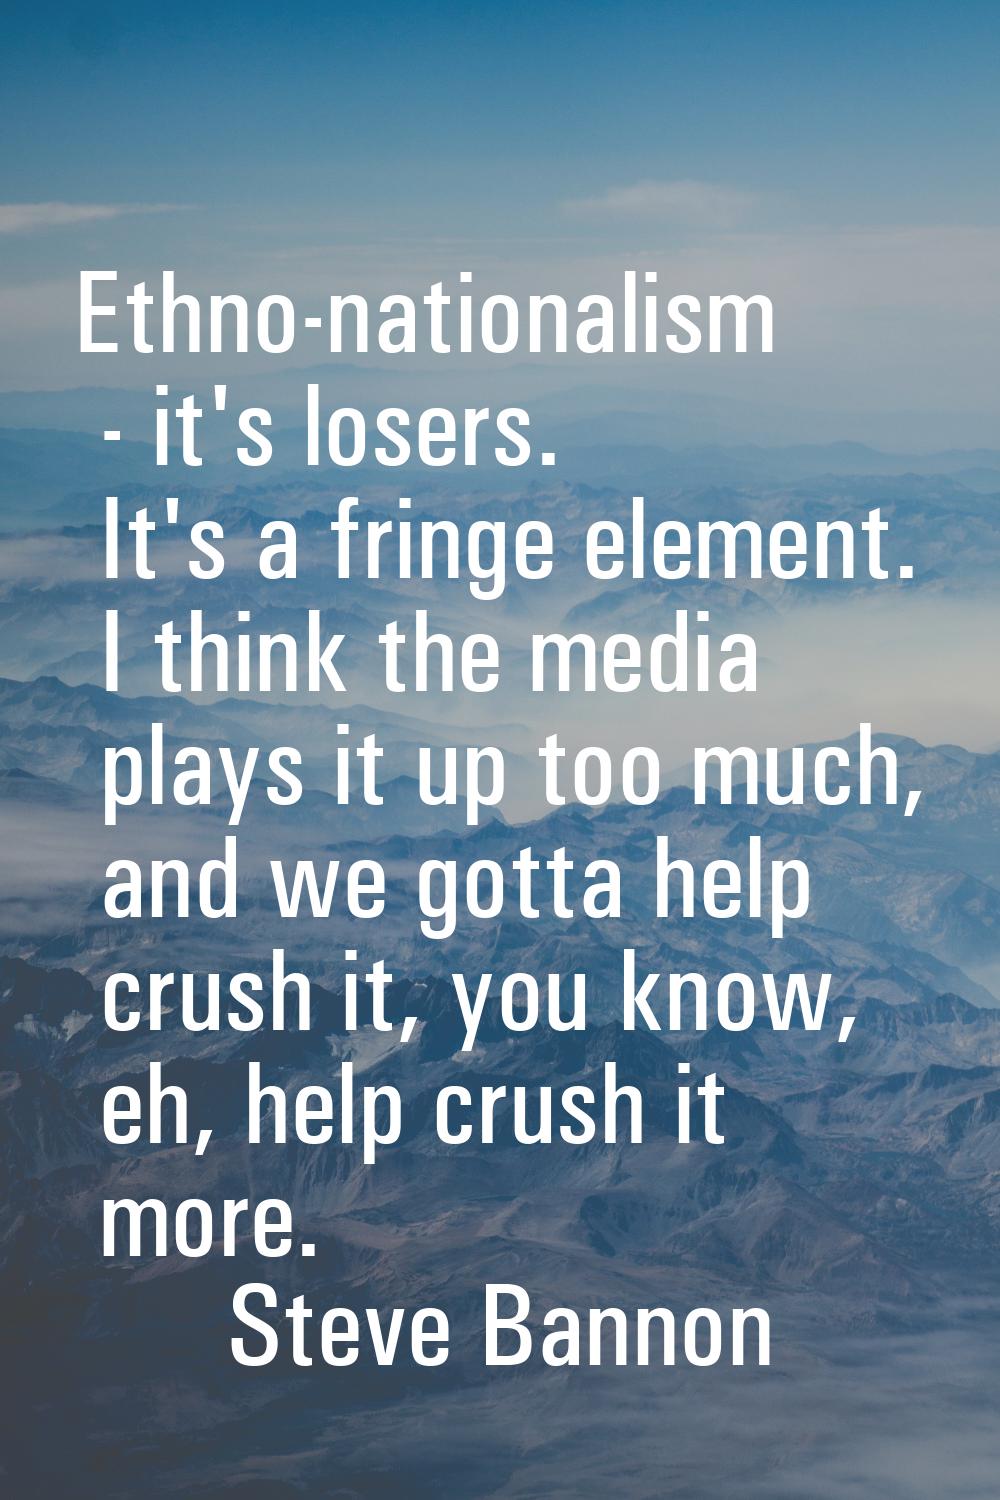 Ethno-nationalism - it's losers. It's a fringe element. I think the media plays it up too much, and